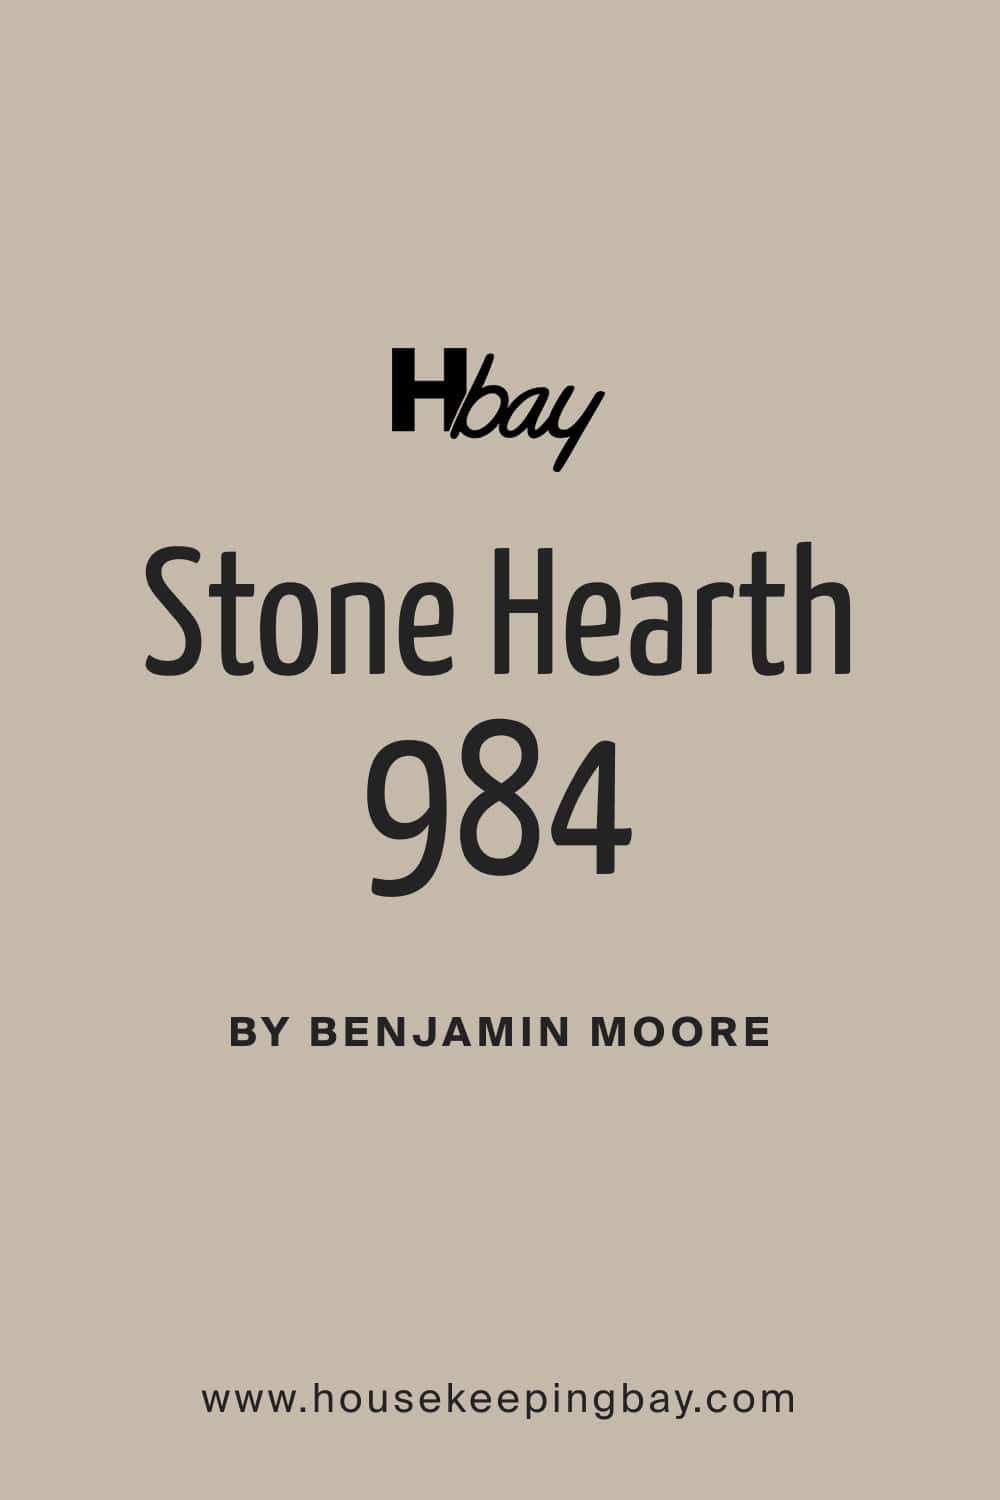 What Kind of Color Is Stone Hearth 984